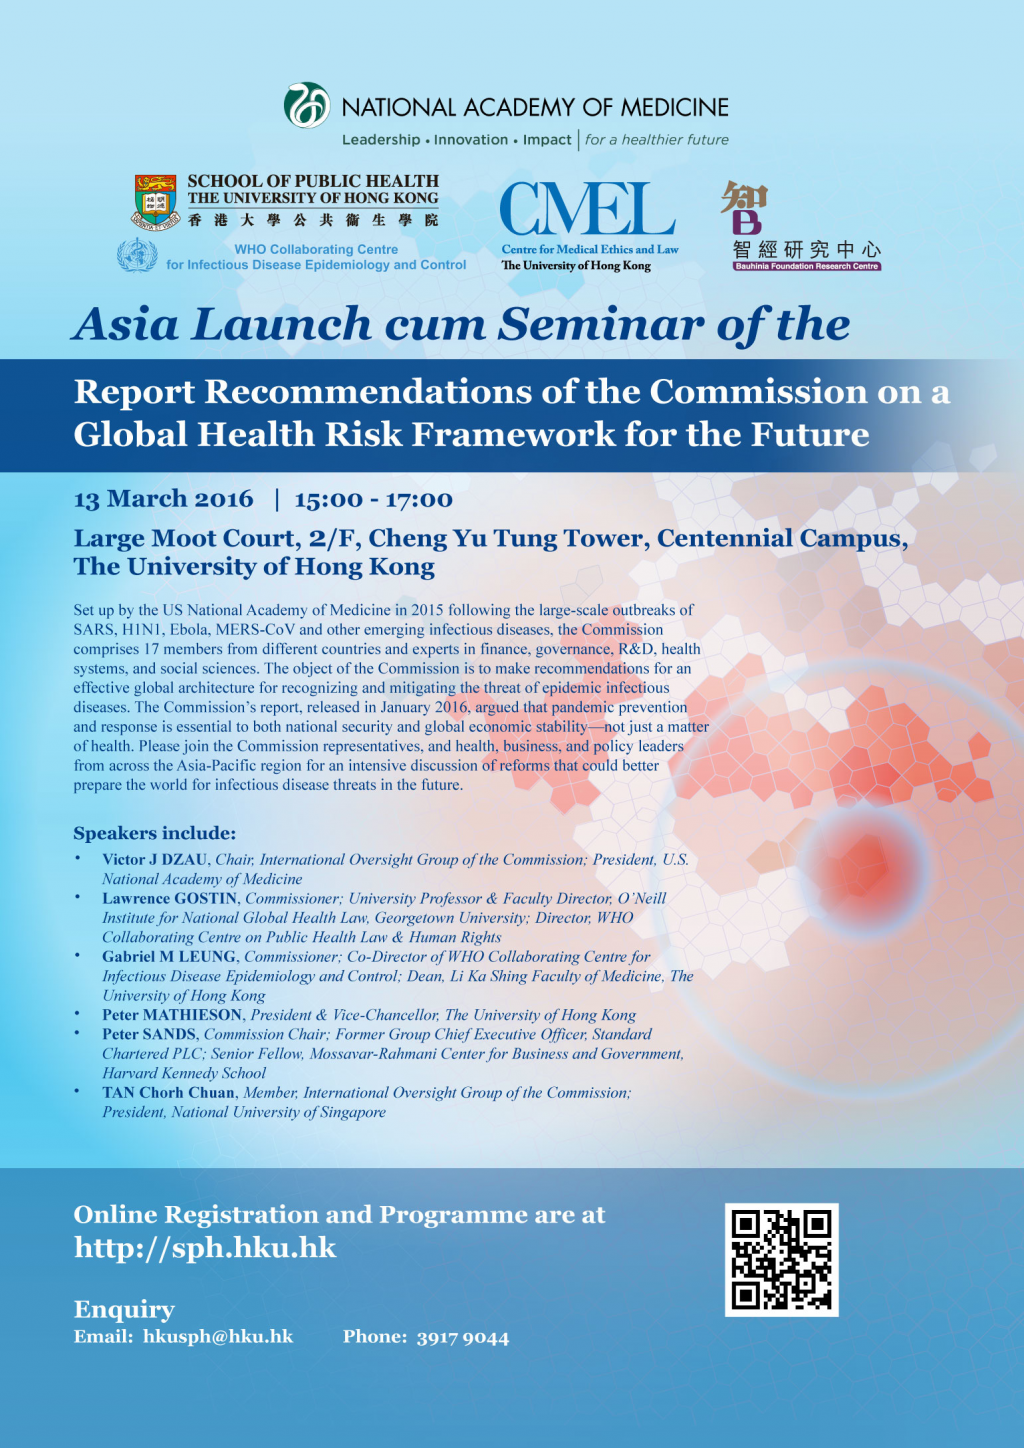 Asia Launch cum Seminar of the Report Recommendations of the Commission on a Global Health Risk Framework  for the Future (GHRF)